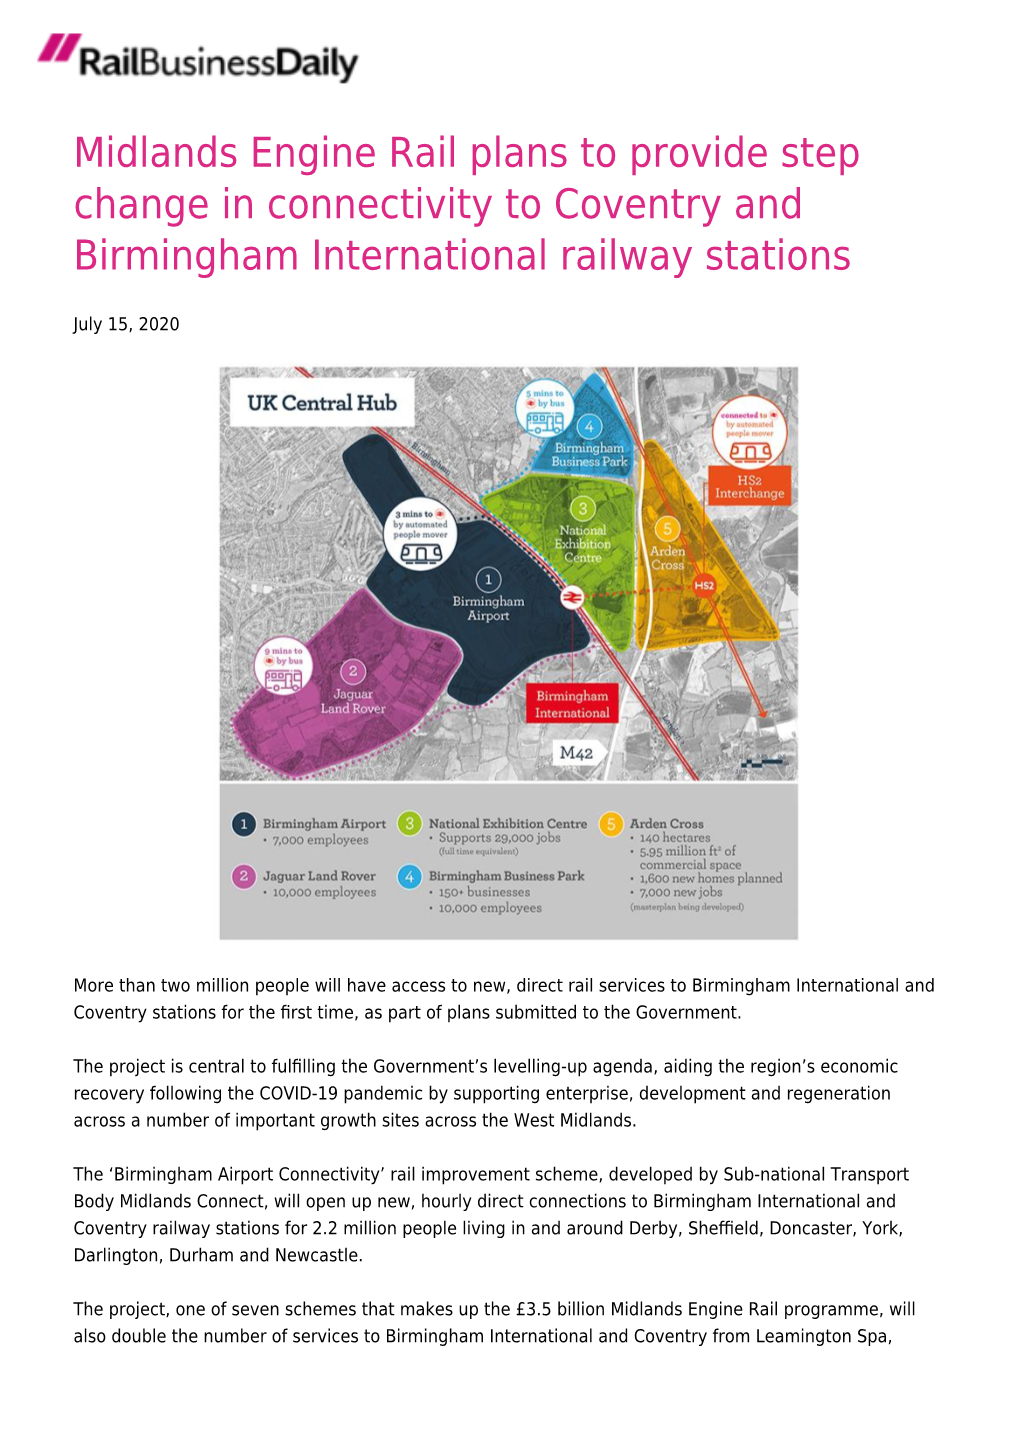 Midlands Engine Rail Plans to Provide Step Change in Connectivity to Coventry and Birmingham International Railway Stations